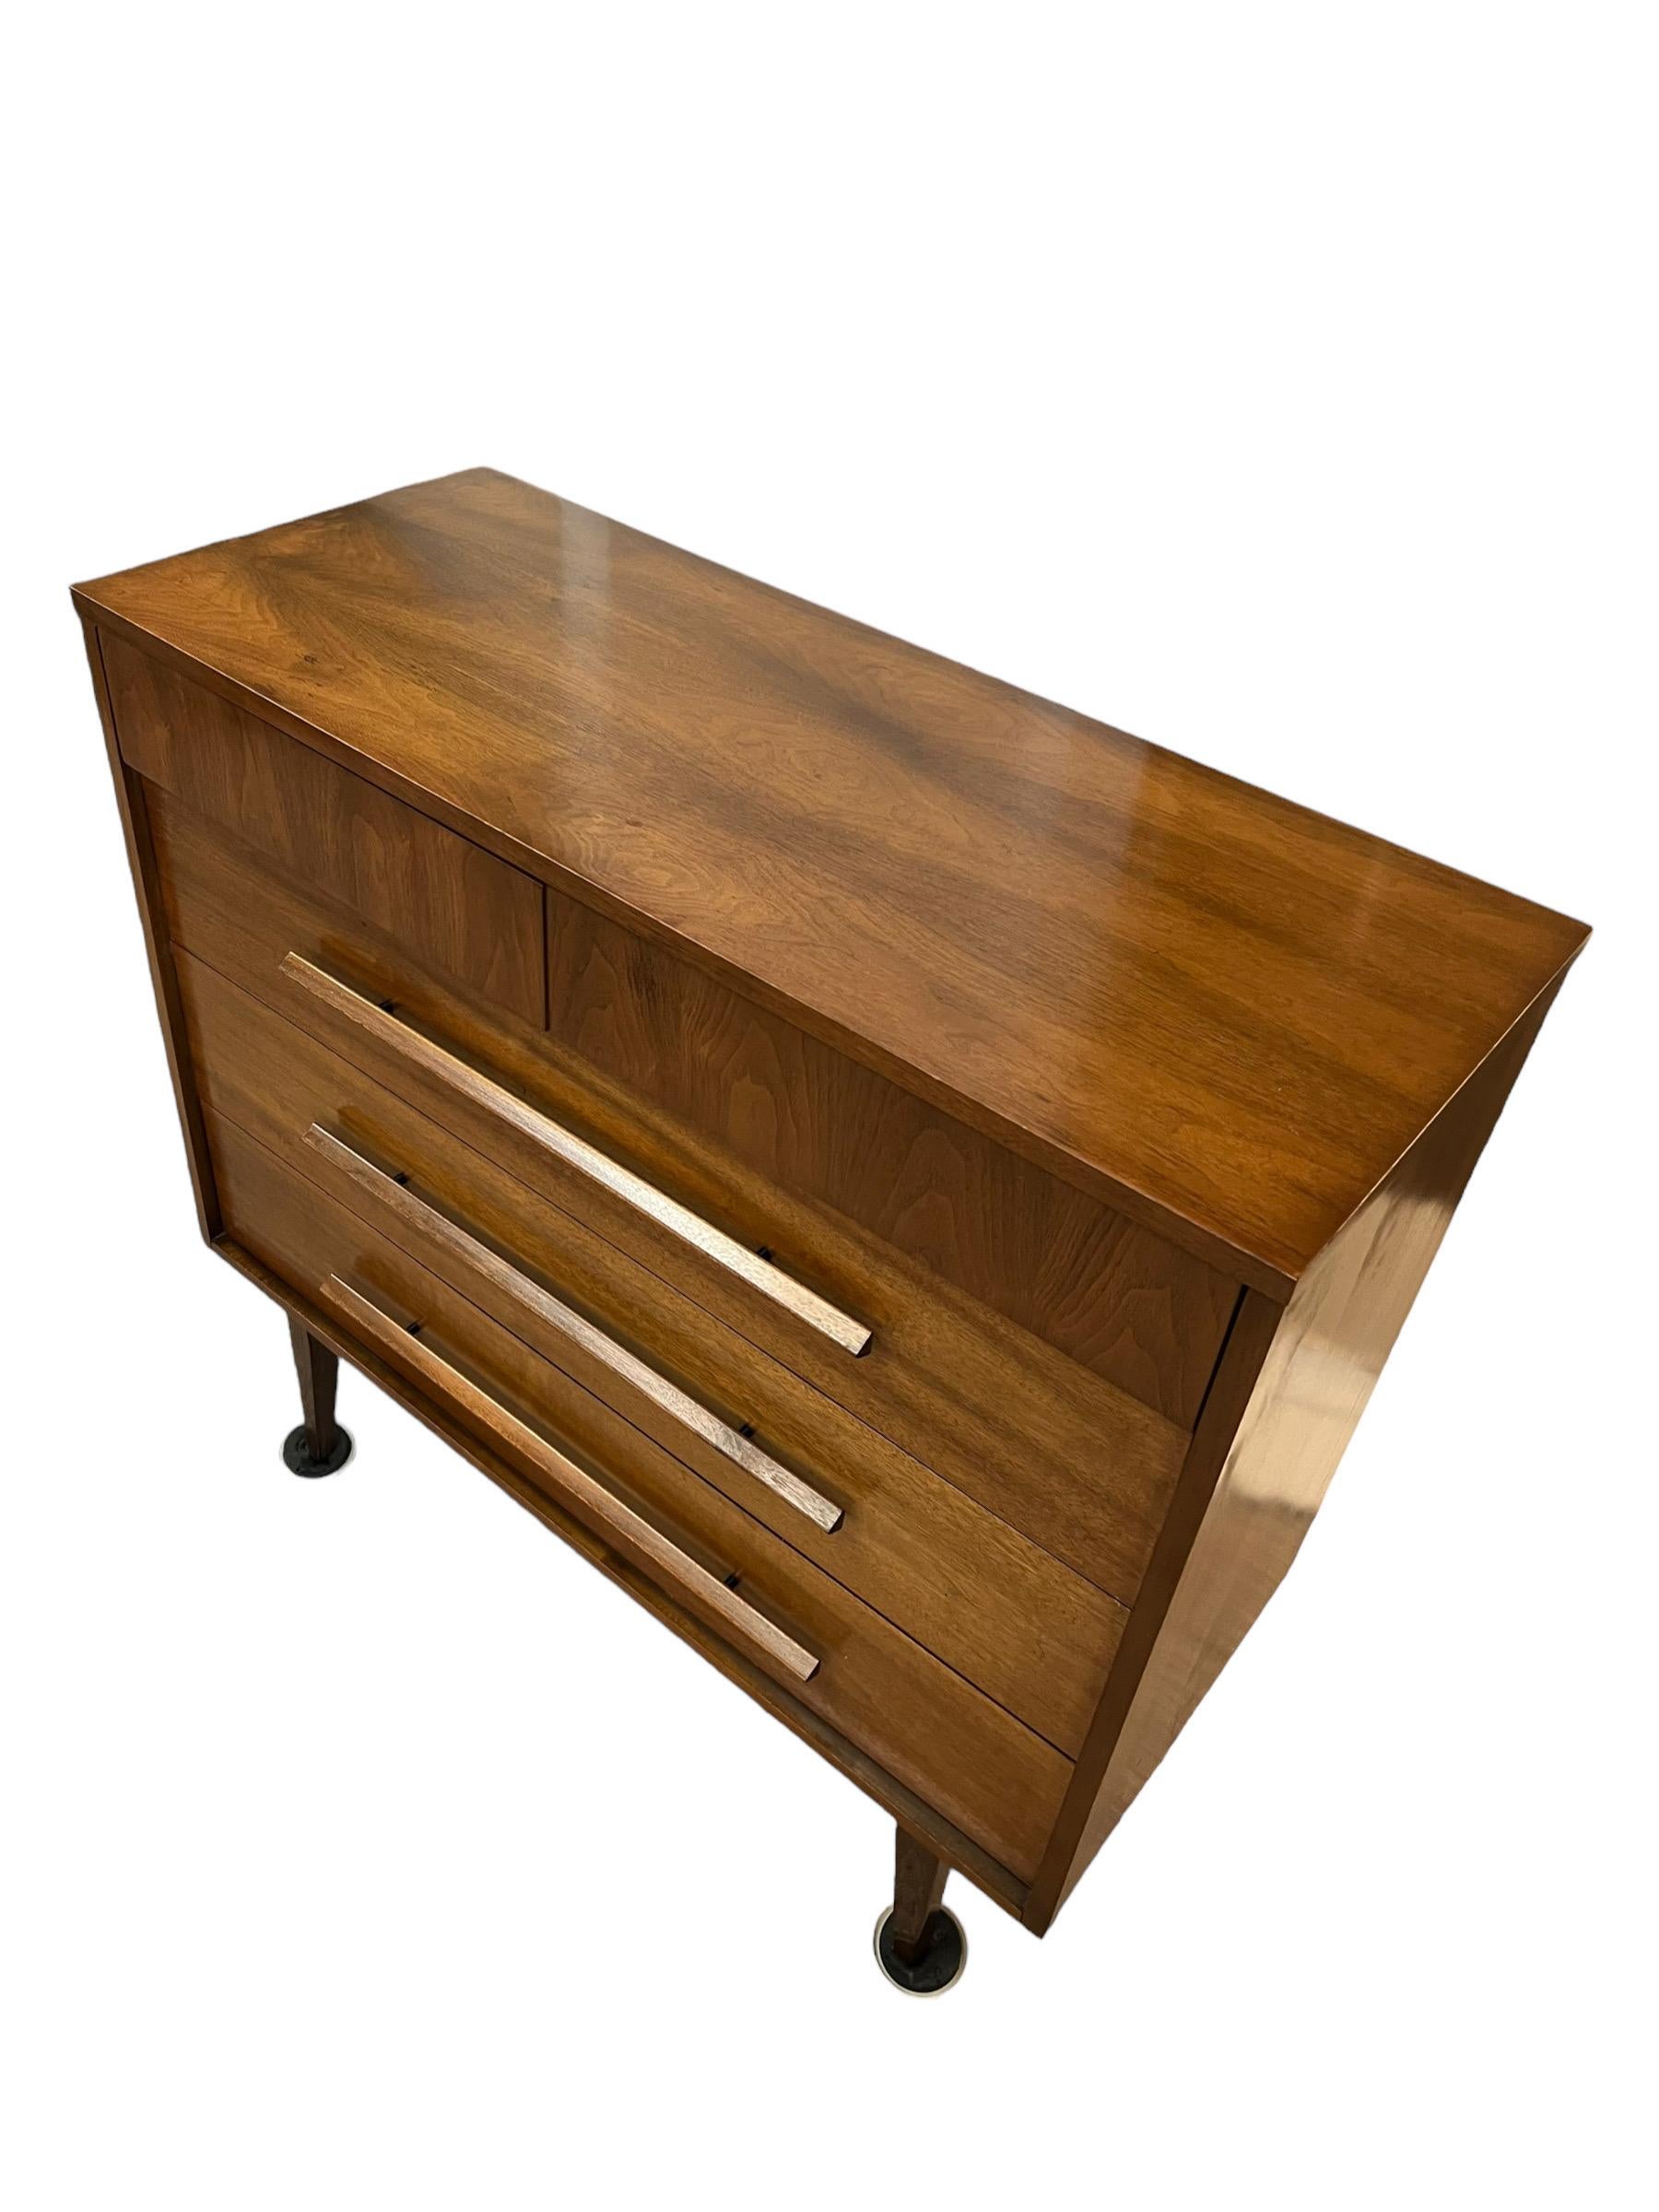 Late 20th Century Vintage Mid Century Modern Cherry Wood Tallboy Dresser and End Table Set For Sale